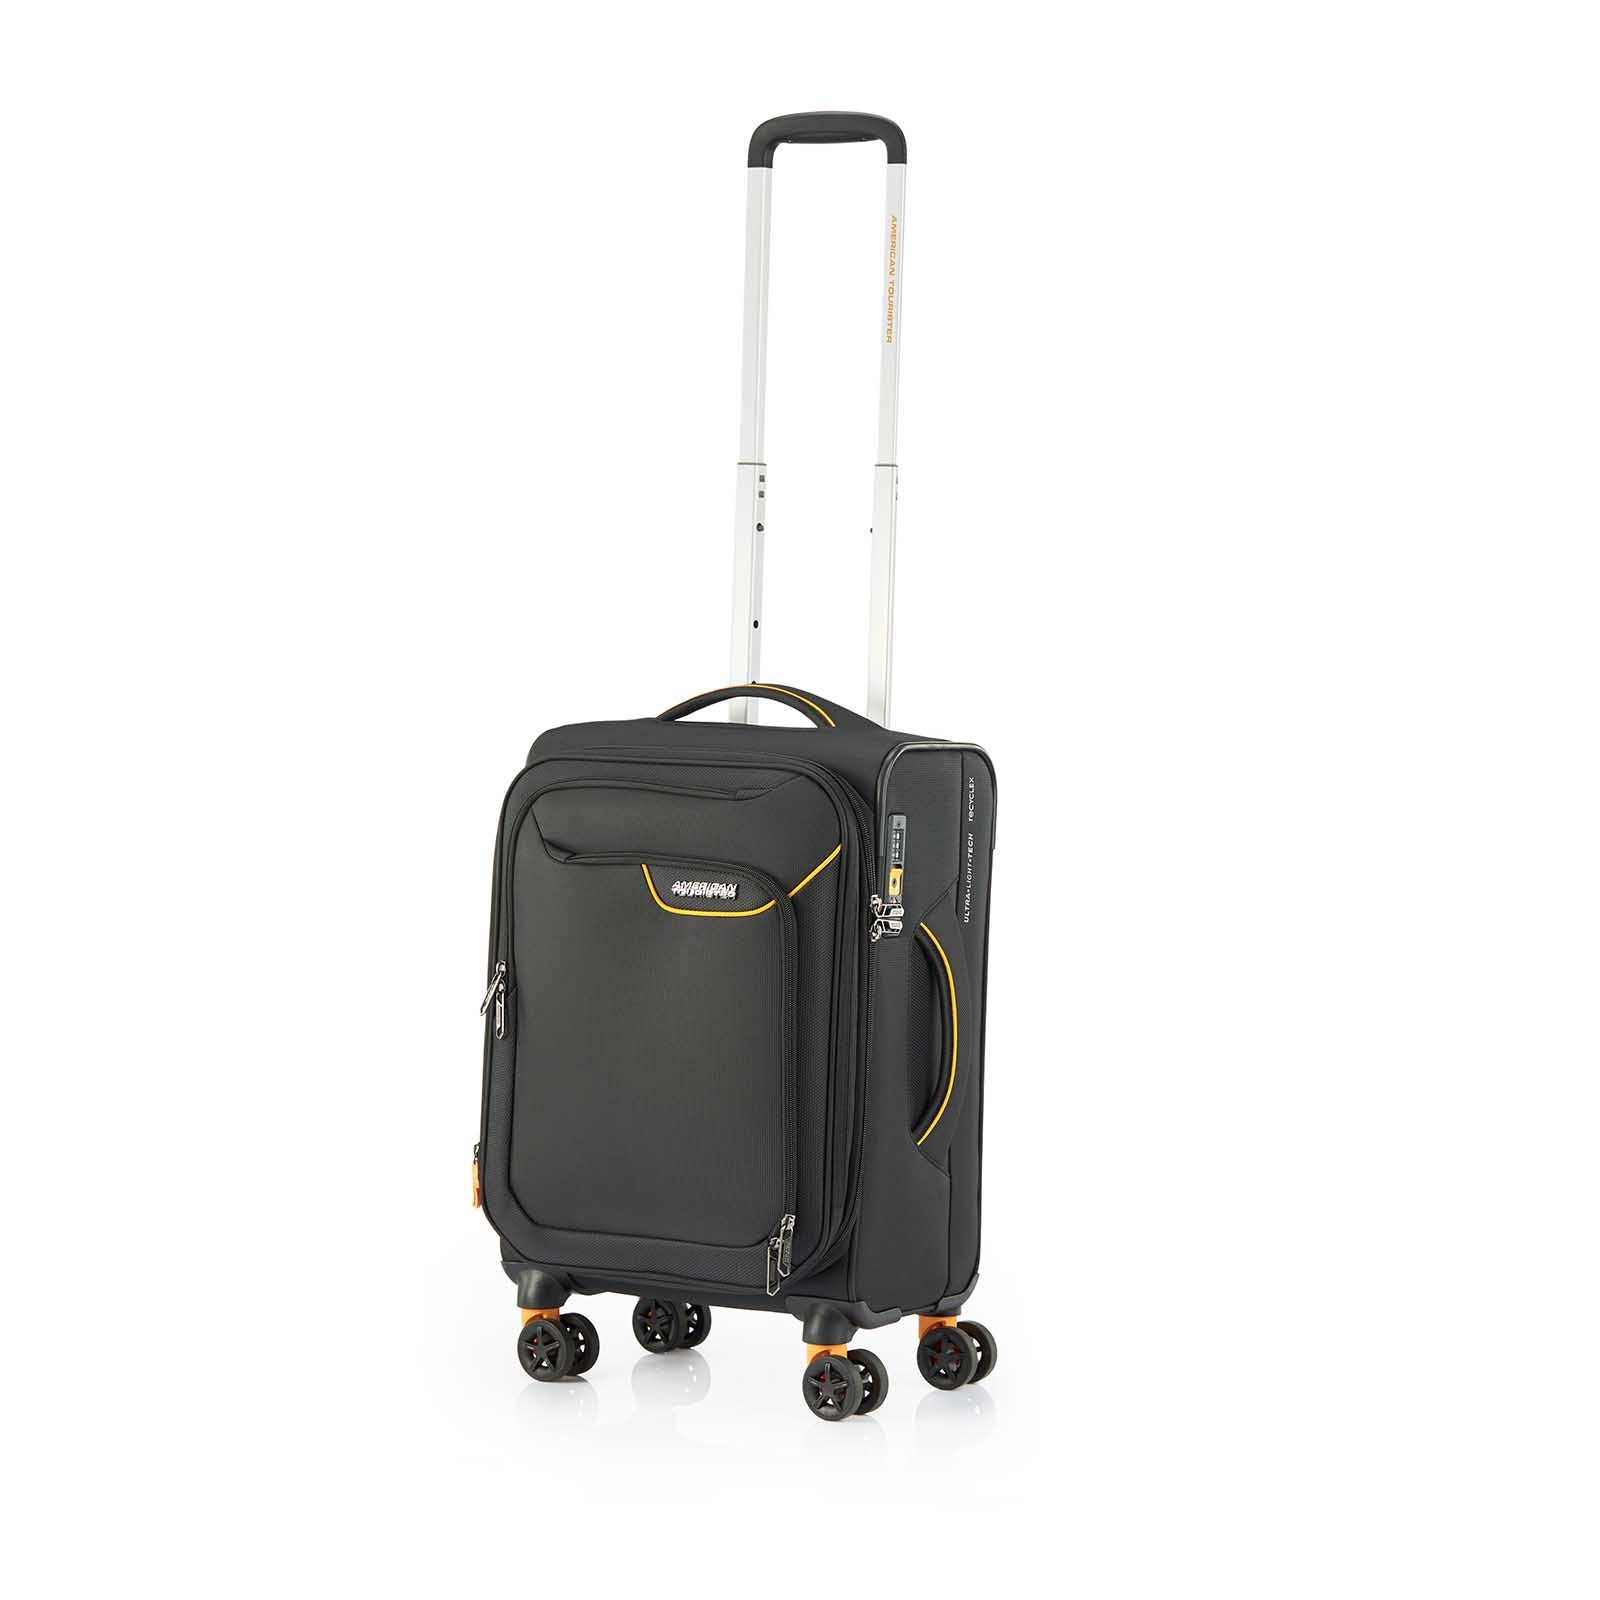 American-Tourister-Applite-4-Eco-55cm-Carry-On-Suitcase-Black-Mustard-Front-Angle